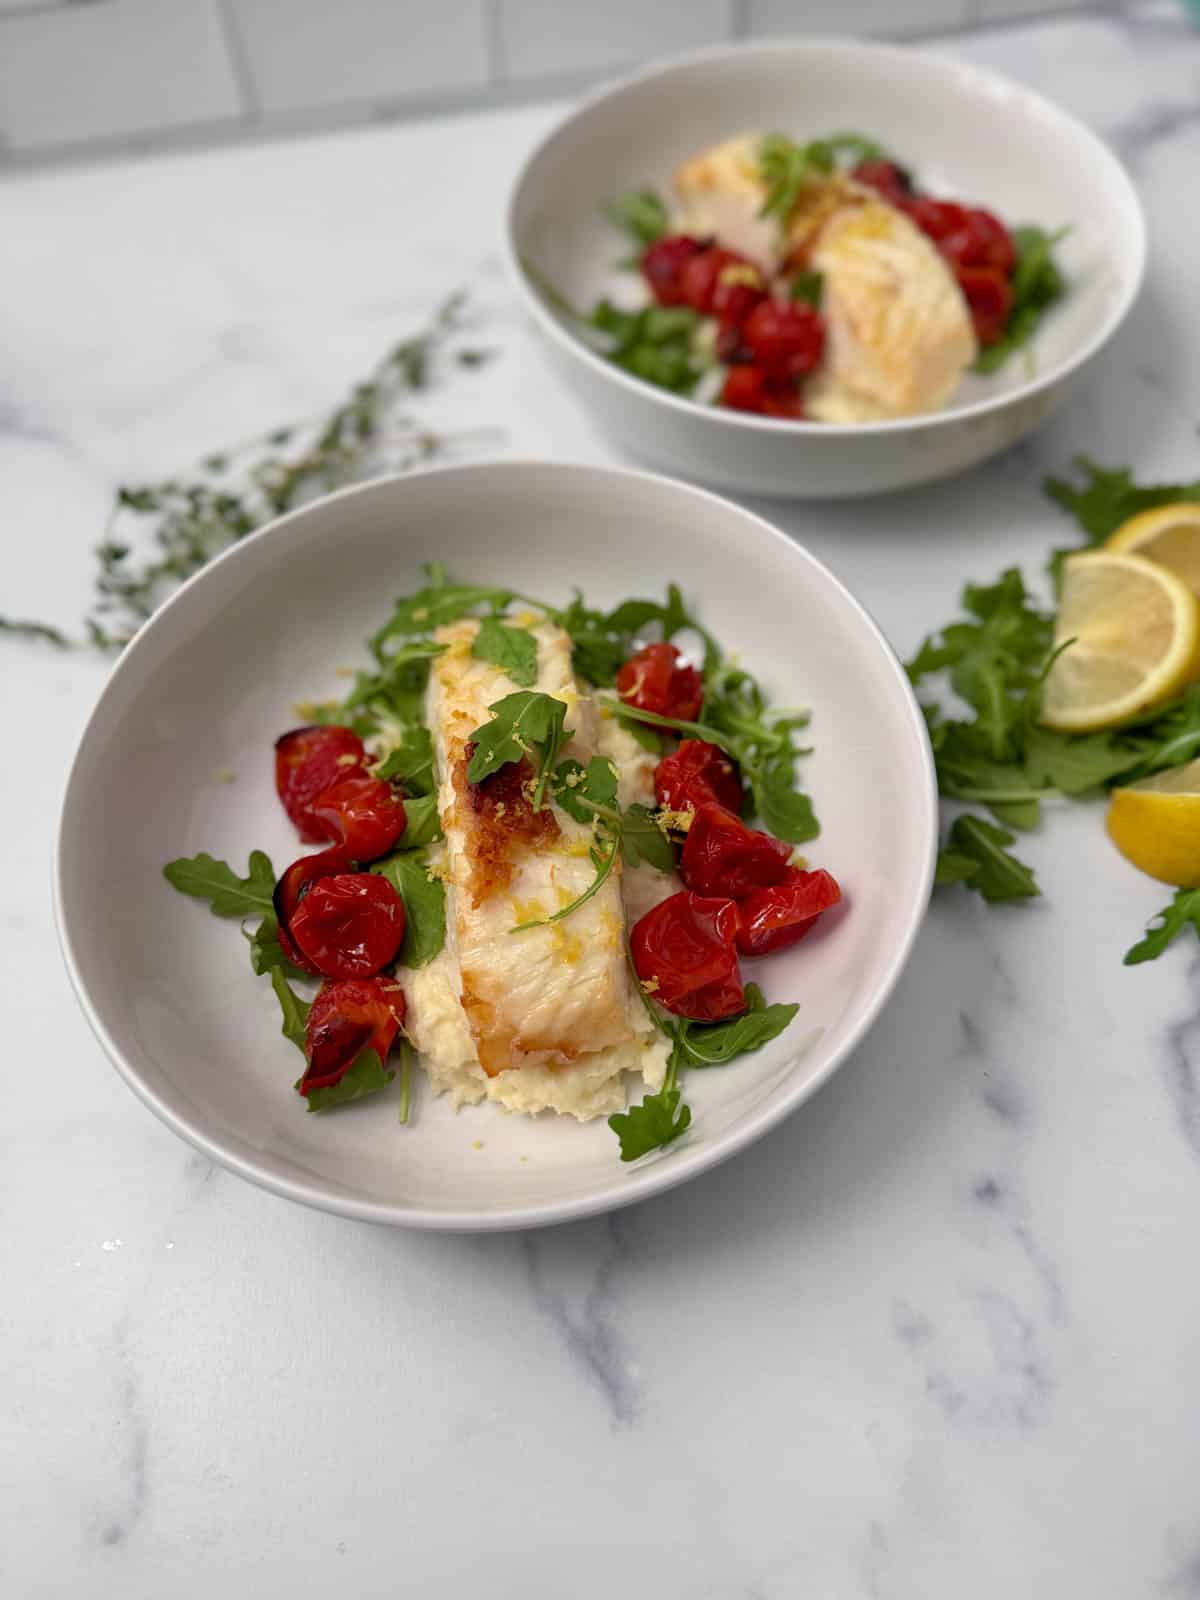 Place the seared fish in a pan in a white bowl over mashed parsnips with roasted cherry tomatoes, arugula and lemon wedges.